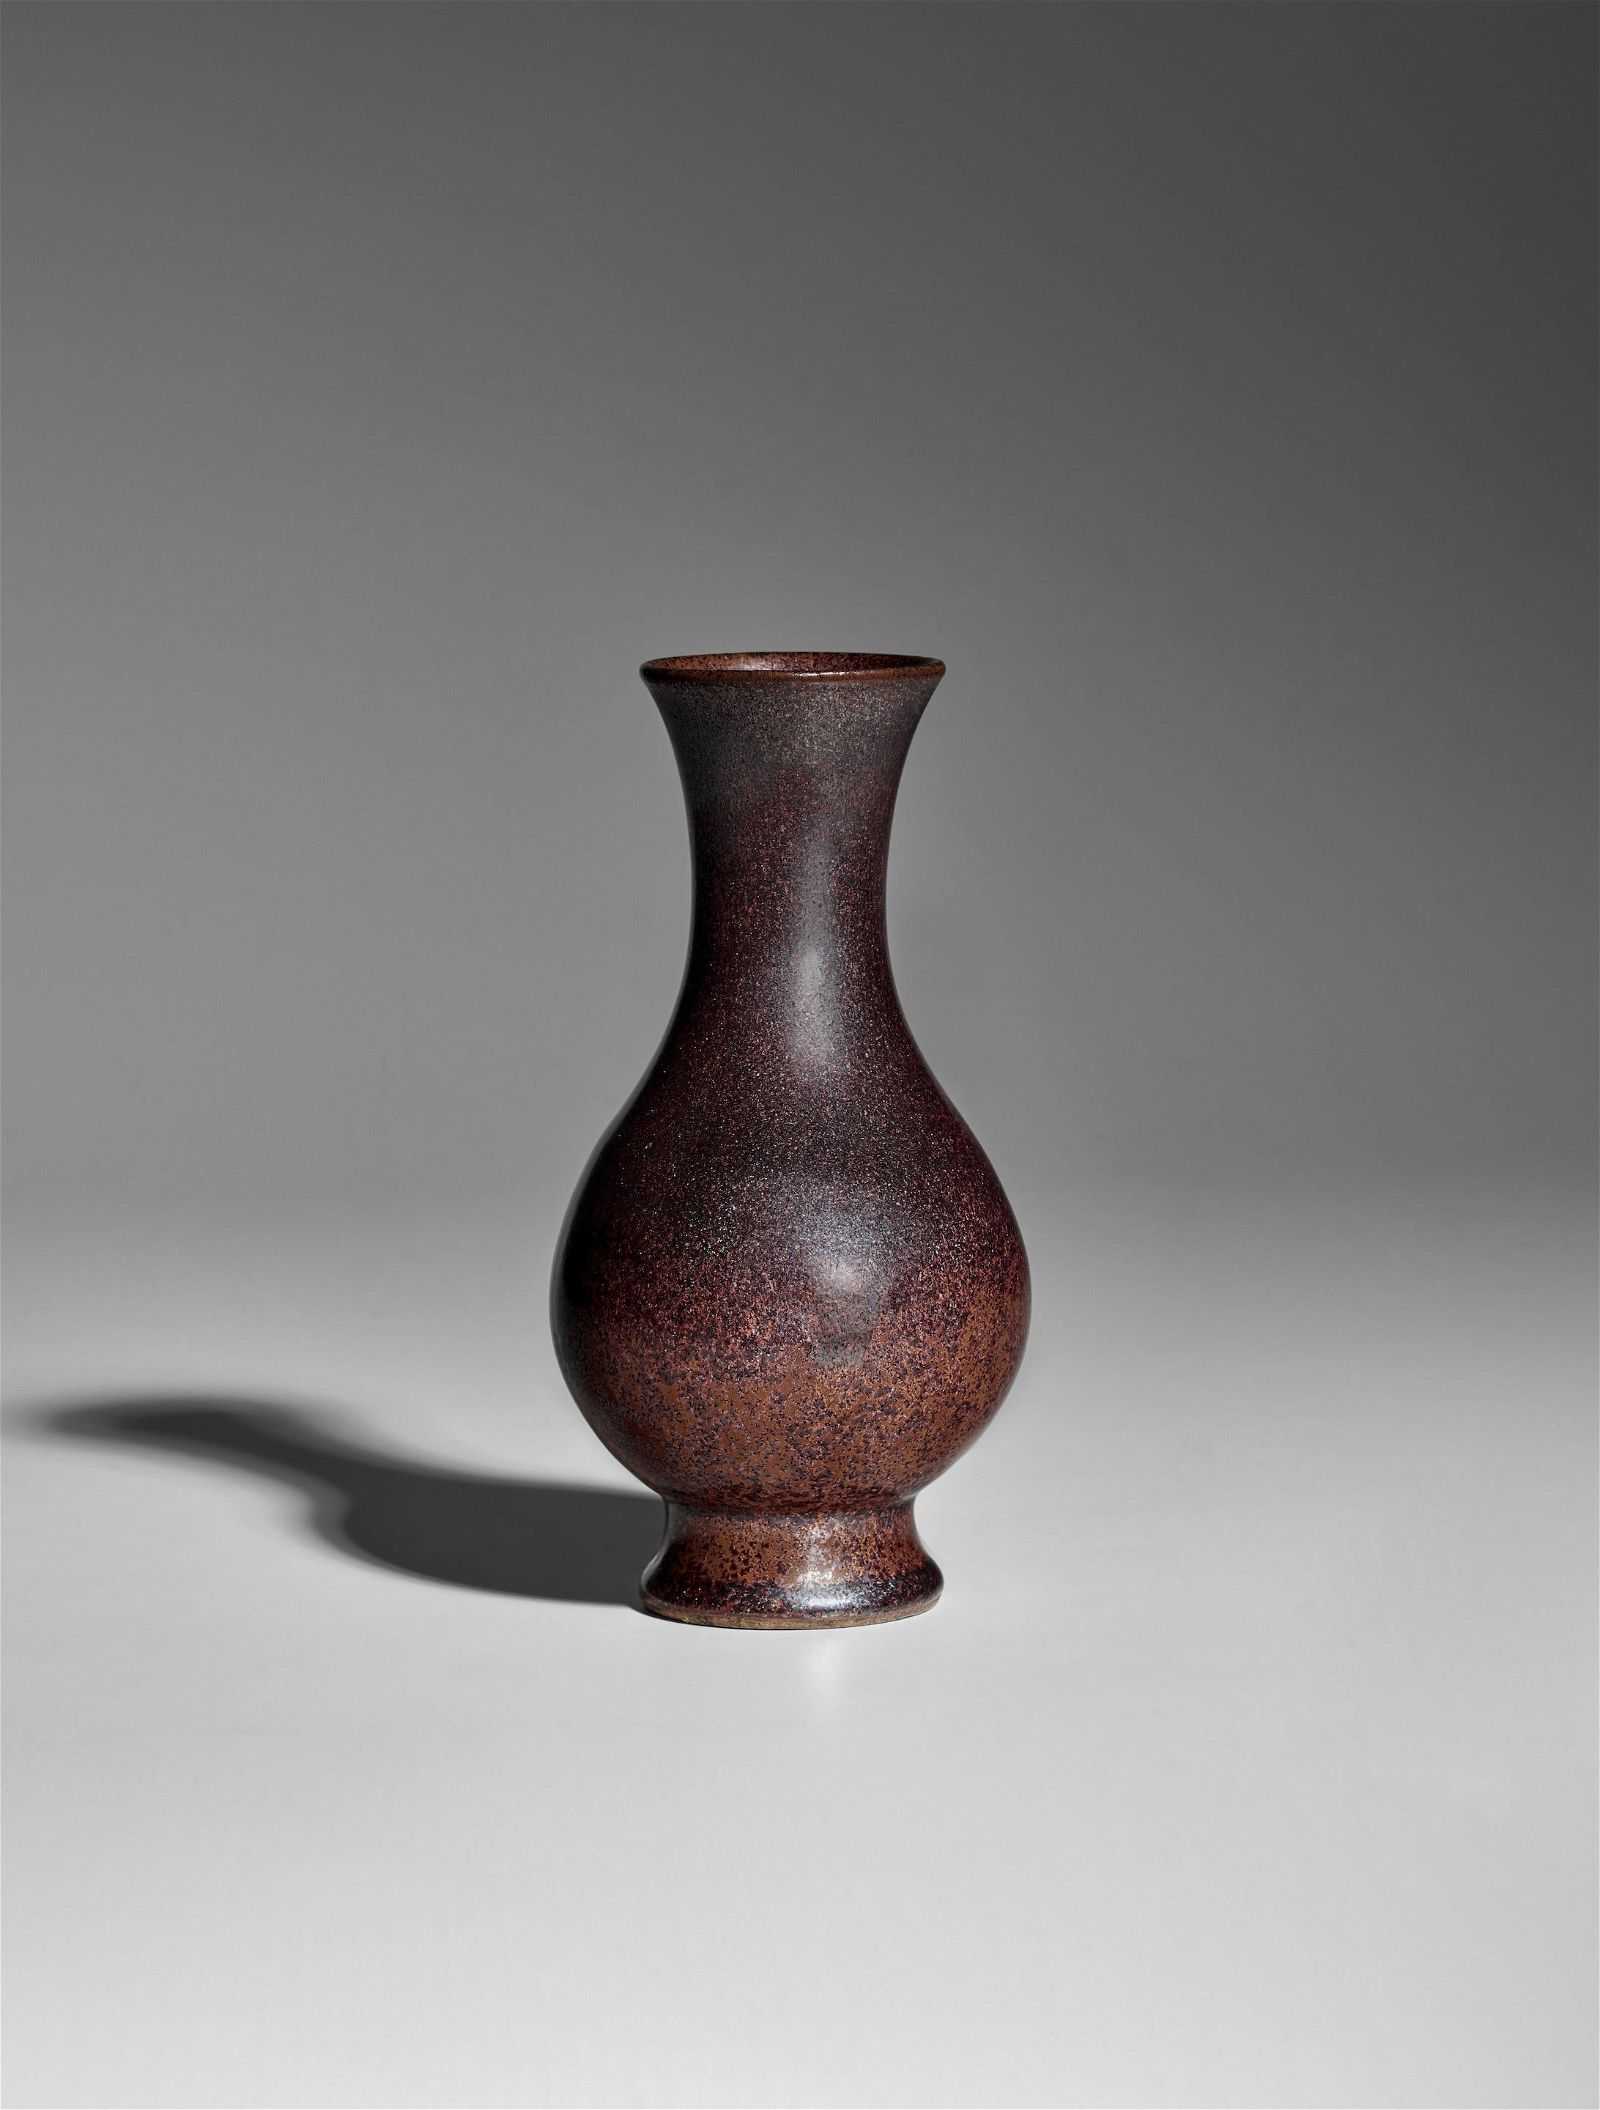 Qianlong ‘imitation bronze’ pear shape vase, which hammered for $32,000 and sold for $40,960 with buyer’s premium as part of Bonhams’ March 18 sale of lots deaccessioned from the Metropolitan Museum of Art.